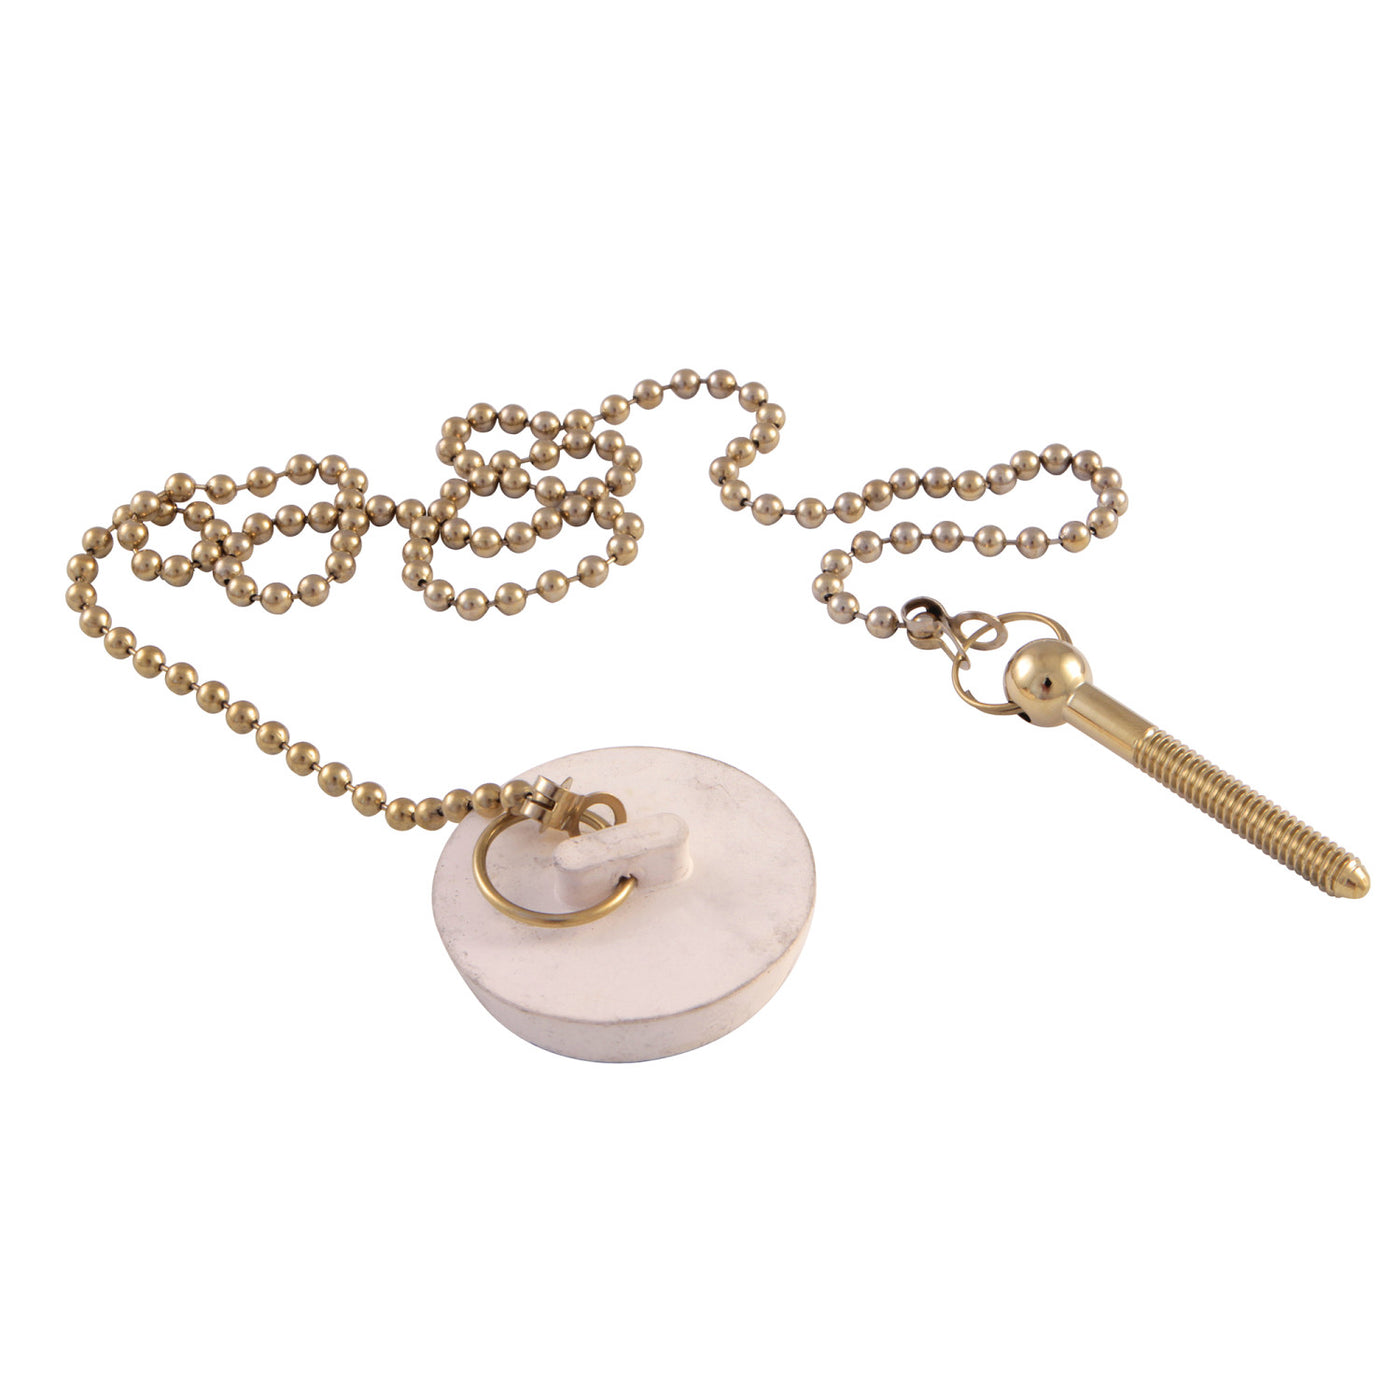 Elements of Design DS2112 Tub Drain Stopper with Chain for CC2092, Polished Brass